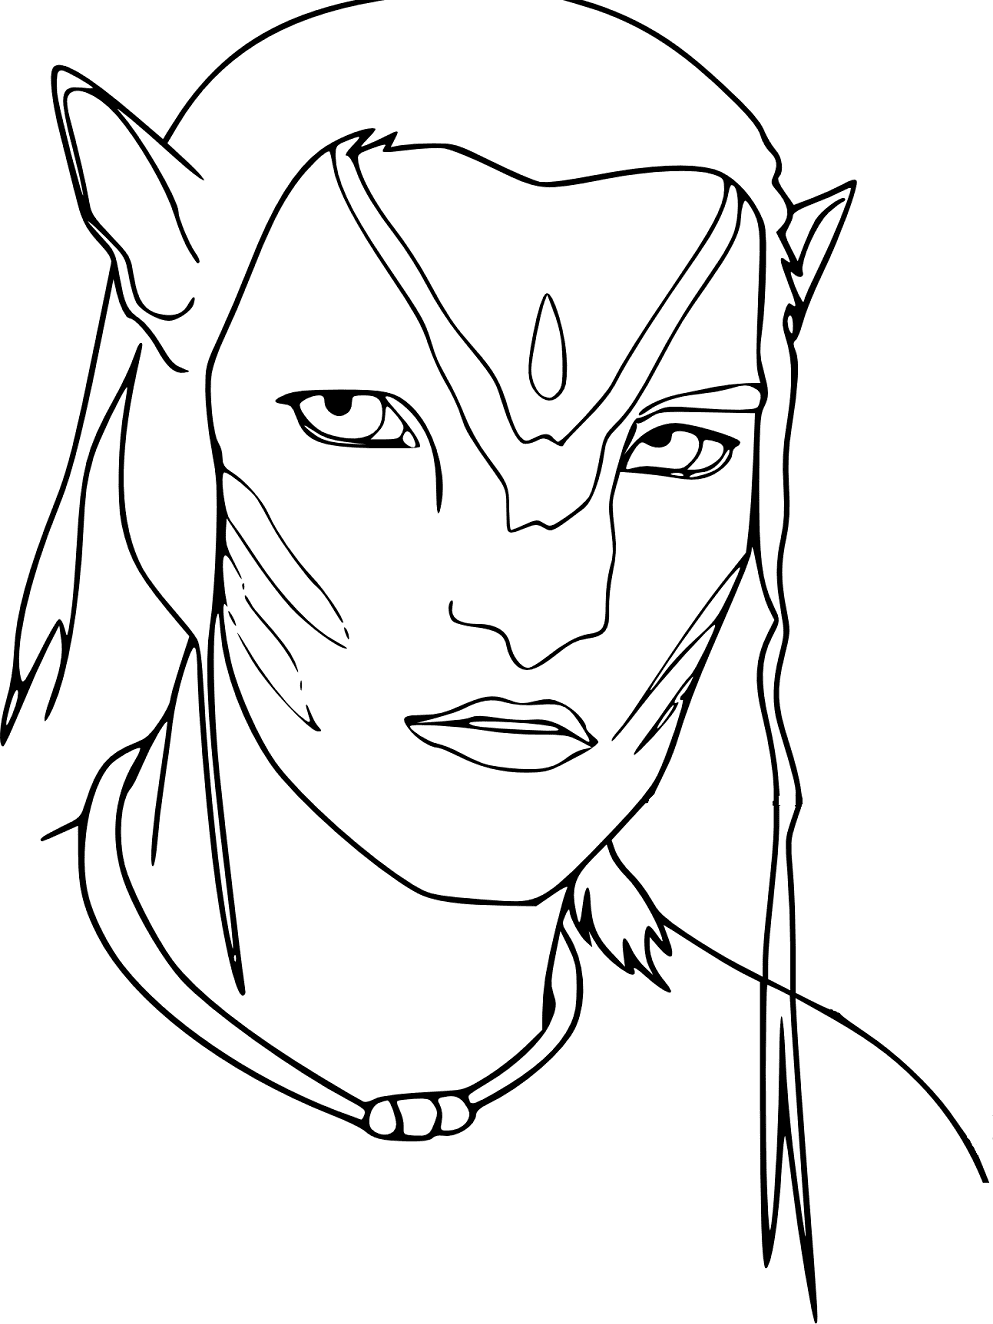 Avatar Movie Printable Coloring Page Free Printable Coloring Pages